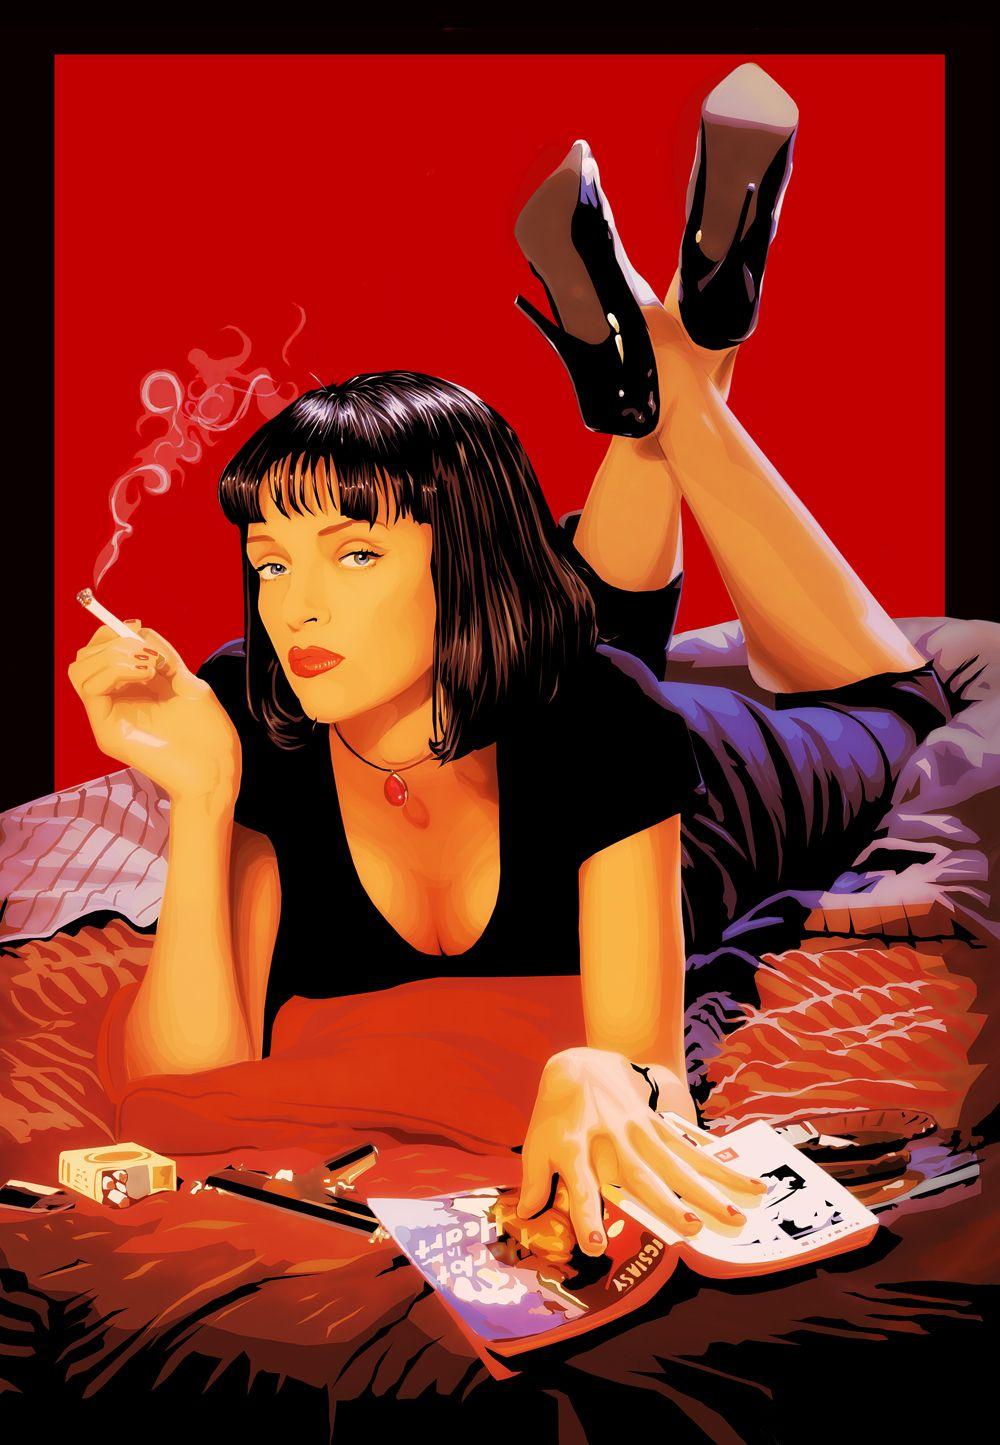 Pulp Fiction IPhone Wallpaper HD  IPhone Wallpapers  iPhone Wallpapers